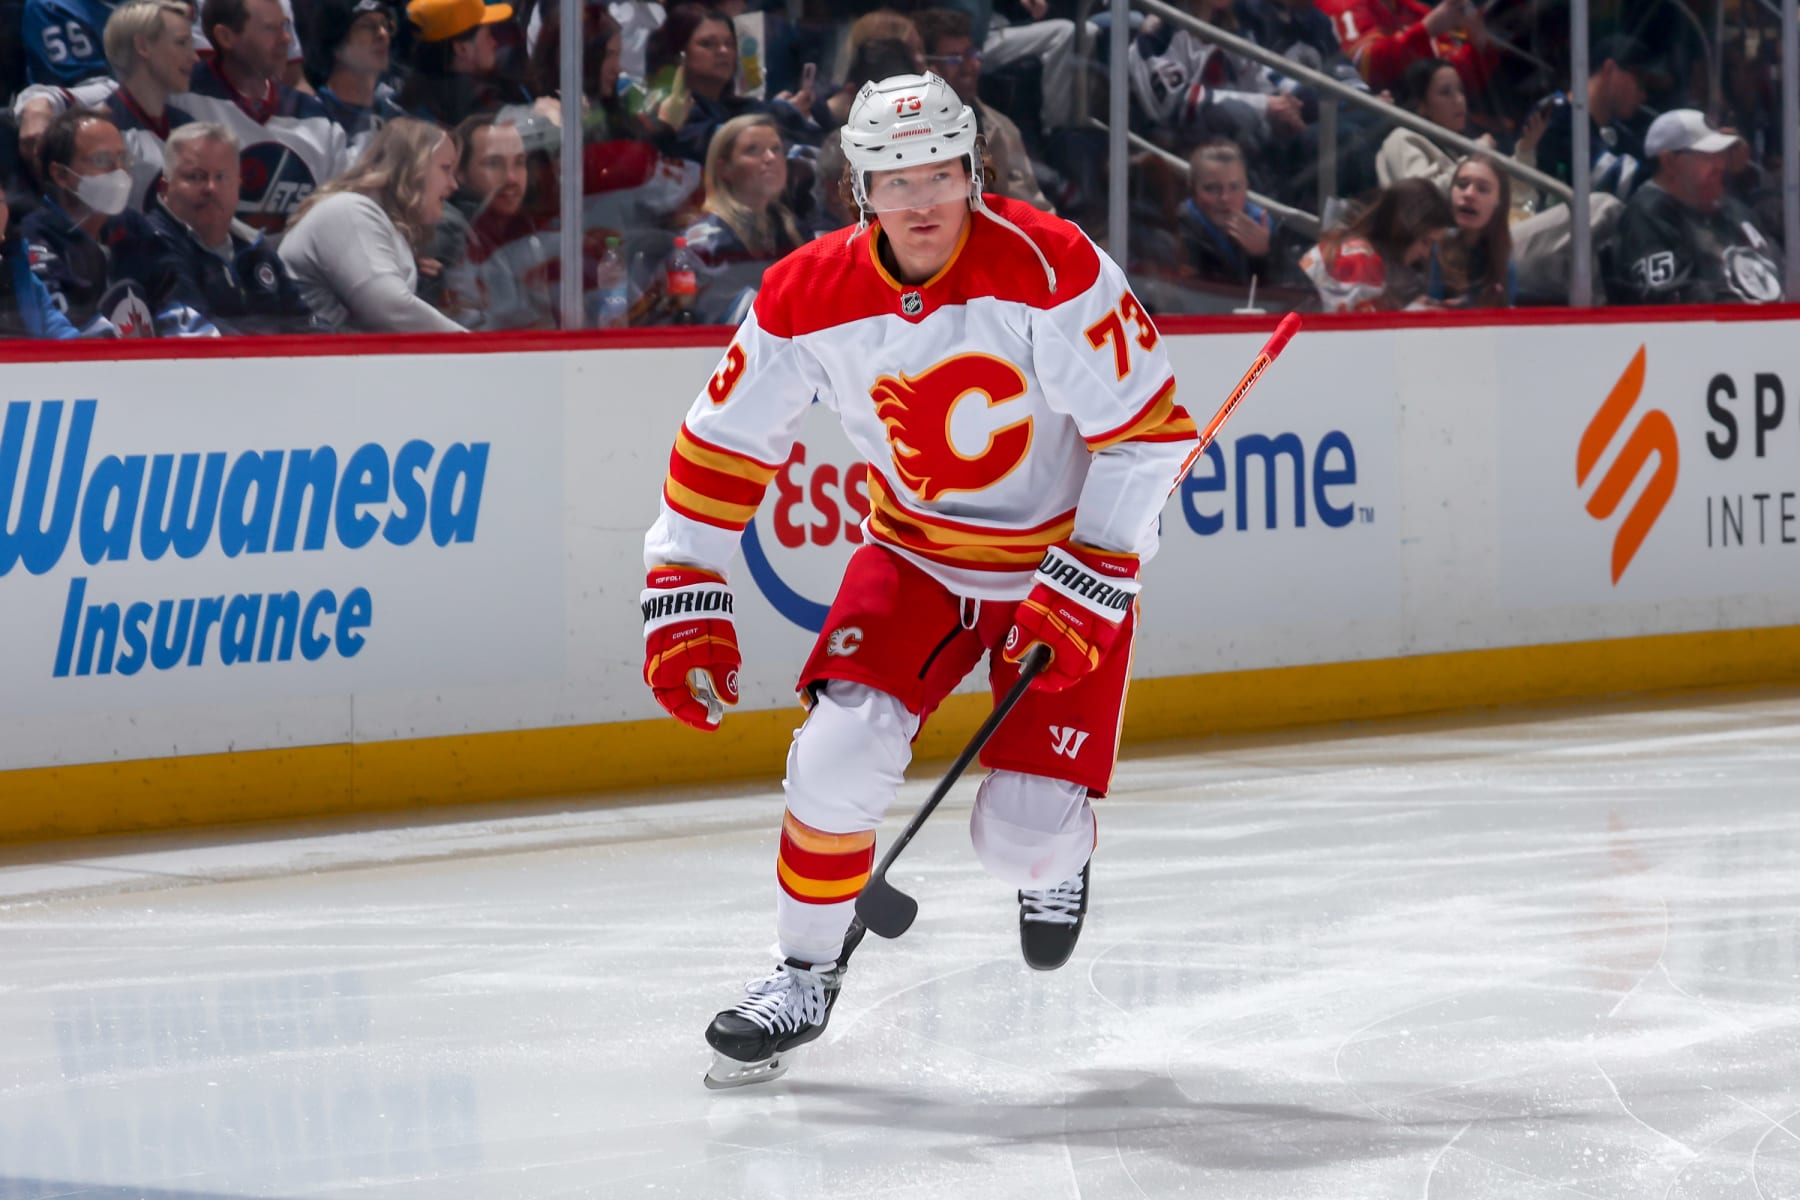 2014 /r/CalgaryFlames Top Prospects: #1 - Johnny Gaudreau (See comments for  write-up) : r/CalgaryFlames